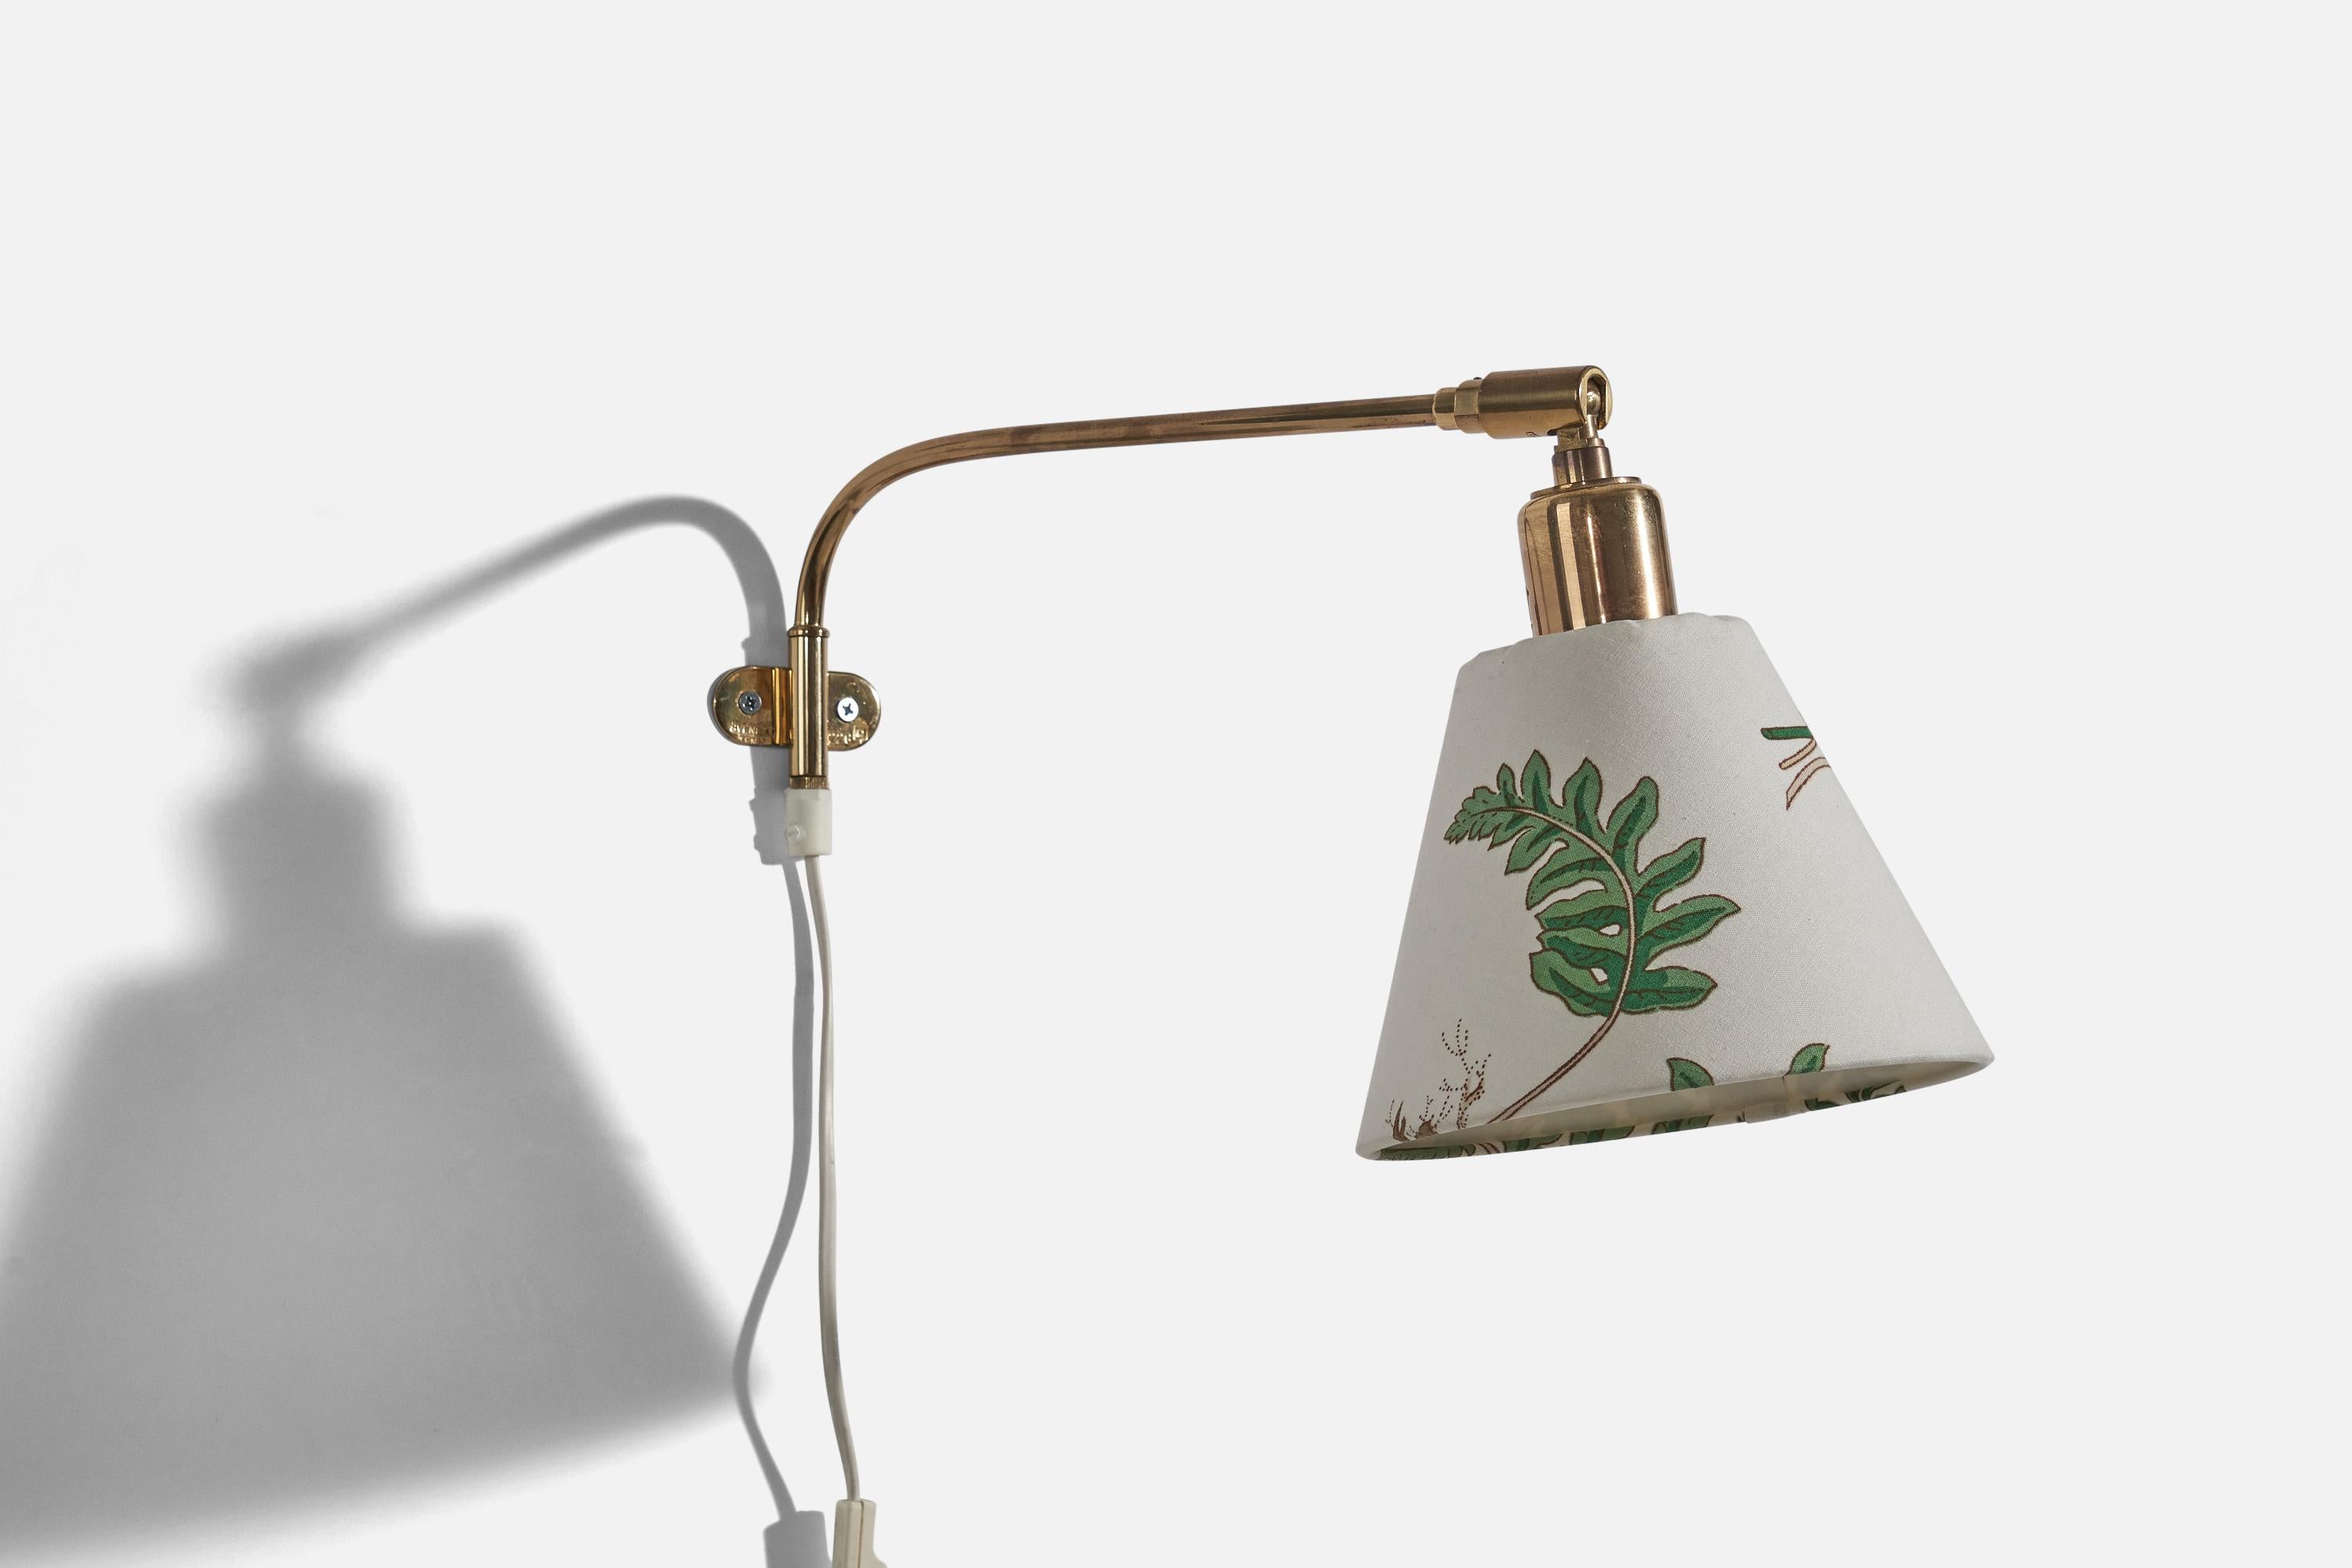 A brass and fabric wall light designed by Josef Frank, Sweden, 1950s. 

Variable dimensions, measured as illustrated in the first image. 

Dimensions of the back plate (inches) : 1 x 2.375 x 0.0625 (H x W x D)